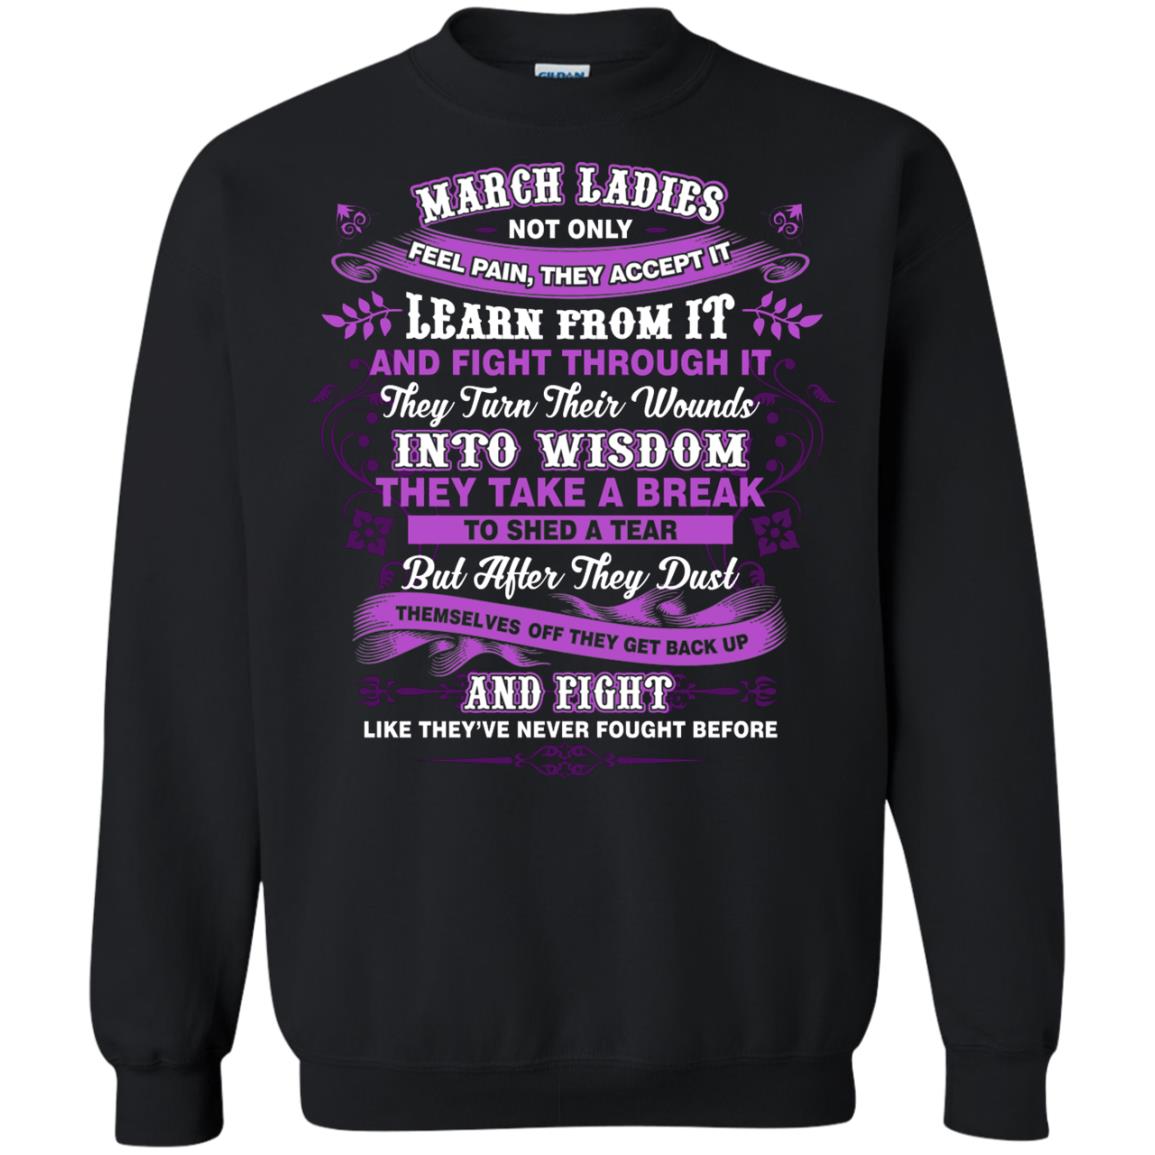 March Ladies Shirt Not Only Feel Pain They Accept It Learn From It They Turn Their Wounds Into WisdomG180 Gildan Crewneck Pullover Sweatshirt 8 oz.